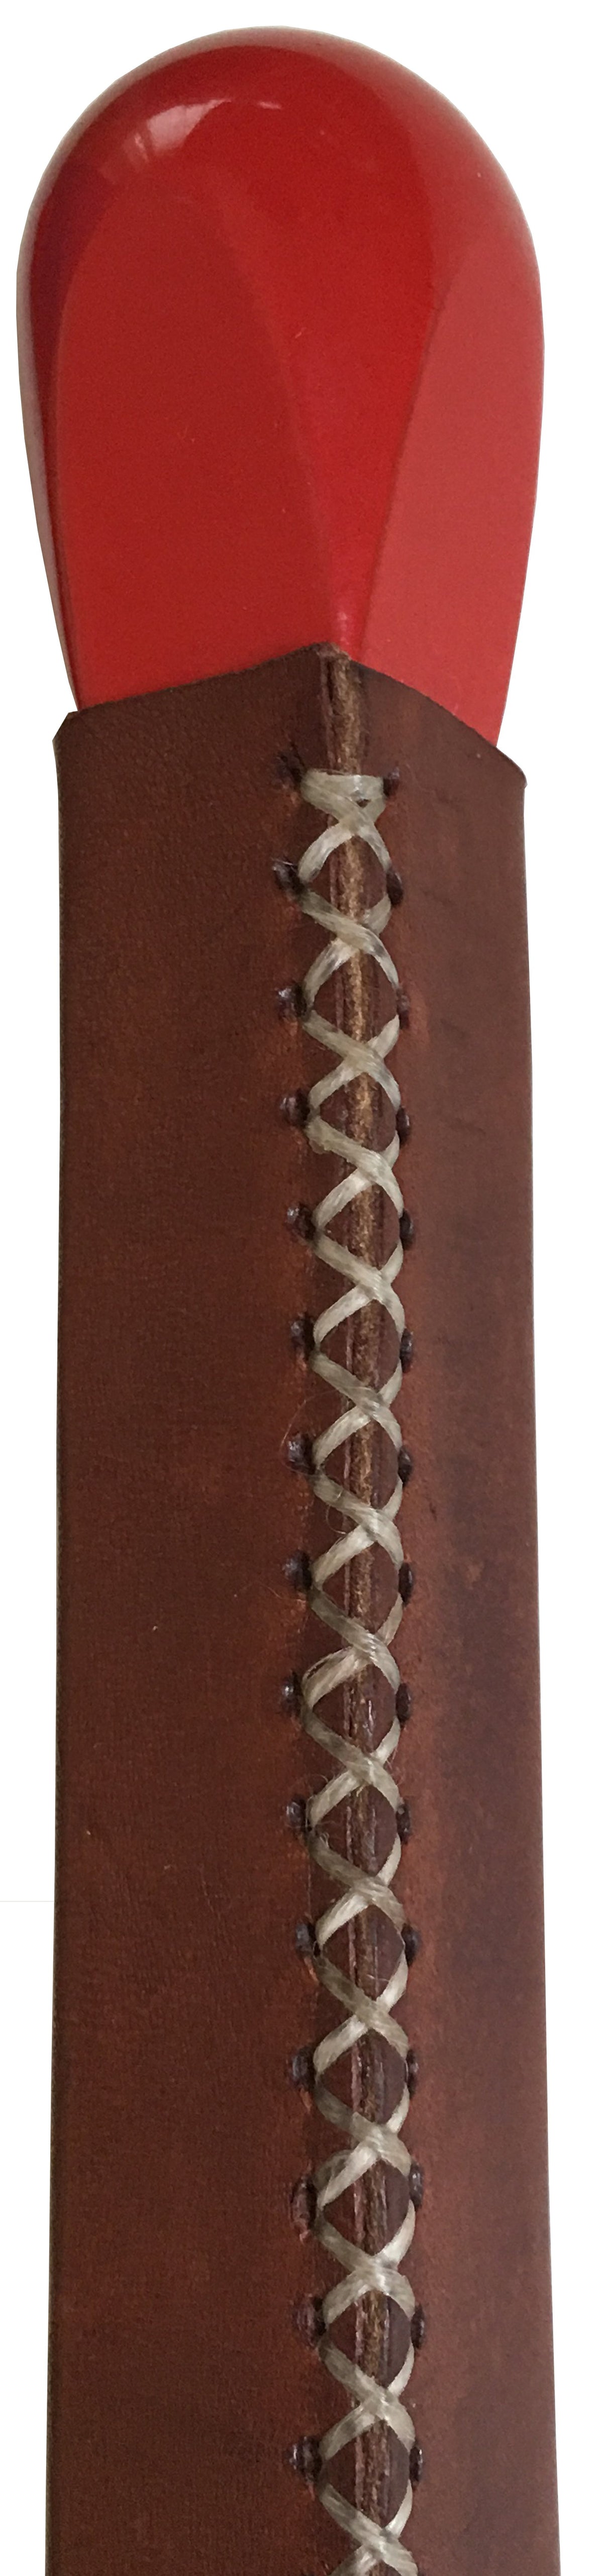 Match Shaped Lighter - Brown Leather